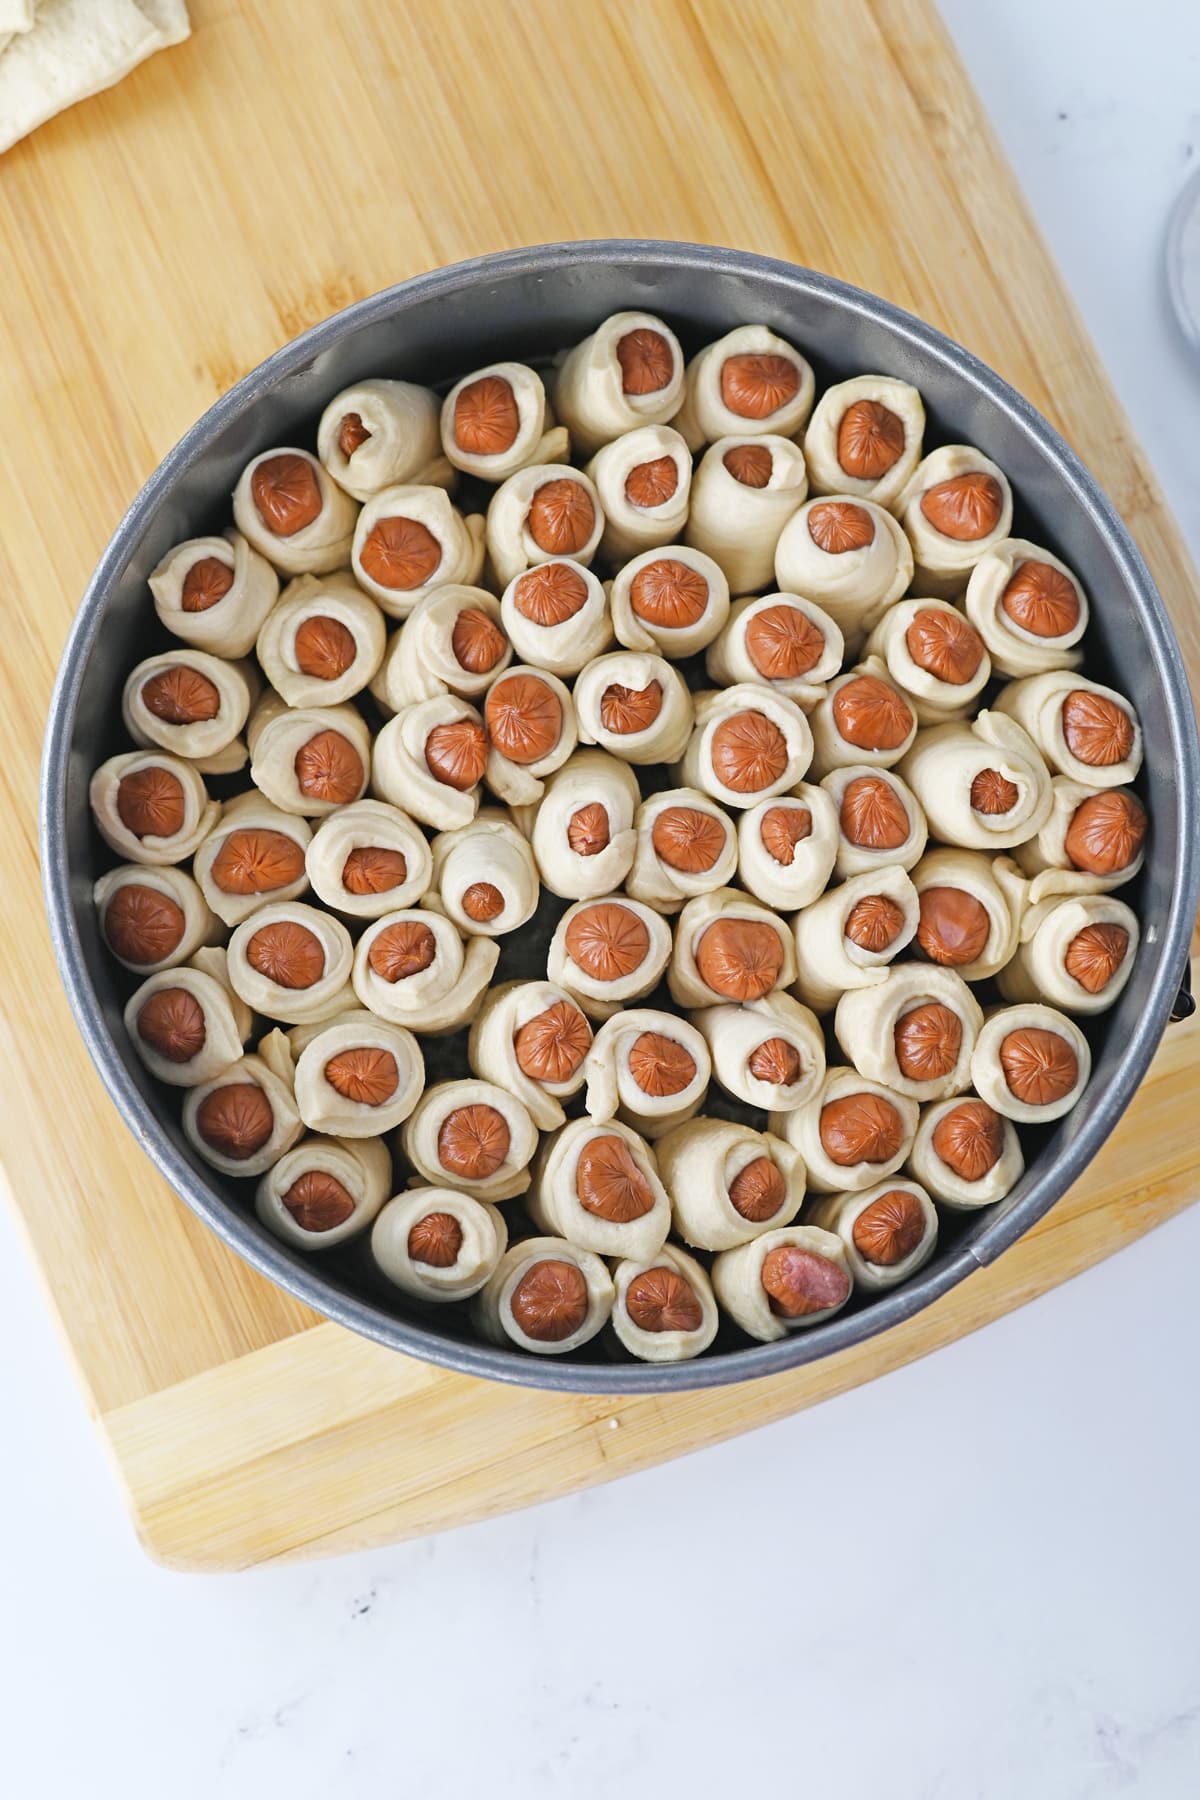 Next step in making Pigs in a Blanket is to prepare hot dog rolls in a pan on a cutting board.